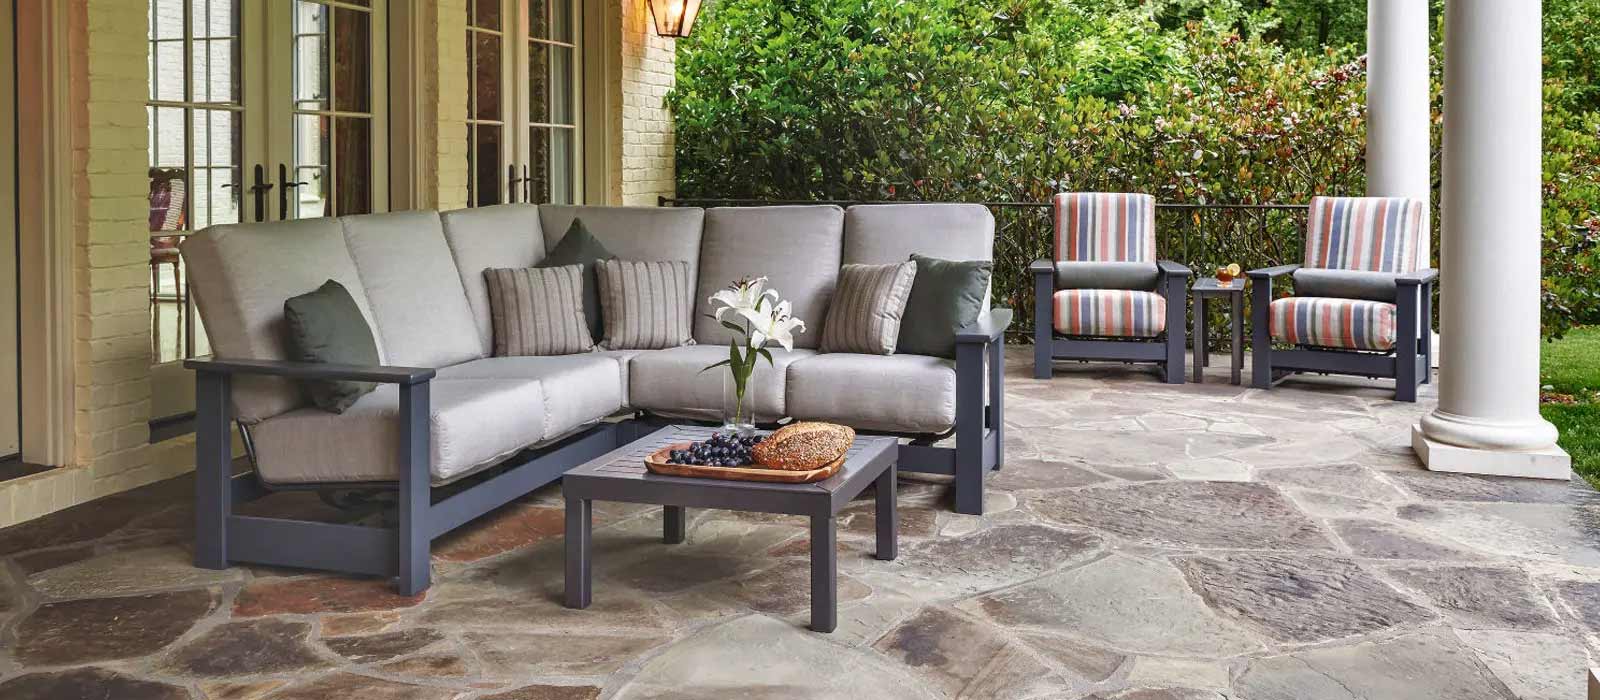 Outdoor patio with a modern sectional sofa offset by two striped chairs, centered around a low coffee table, set on a stone floor with lush greenery in the background and warmed by an elegant fireplace insert.